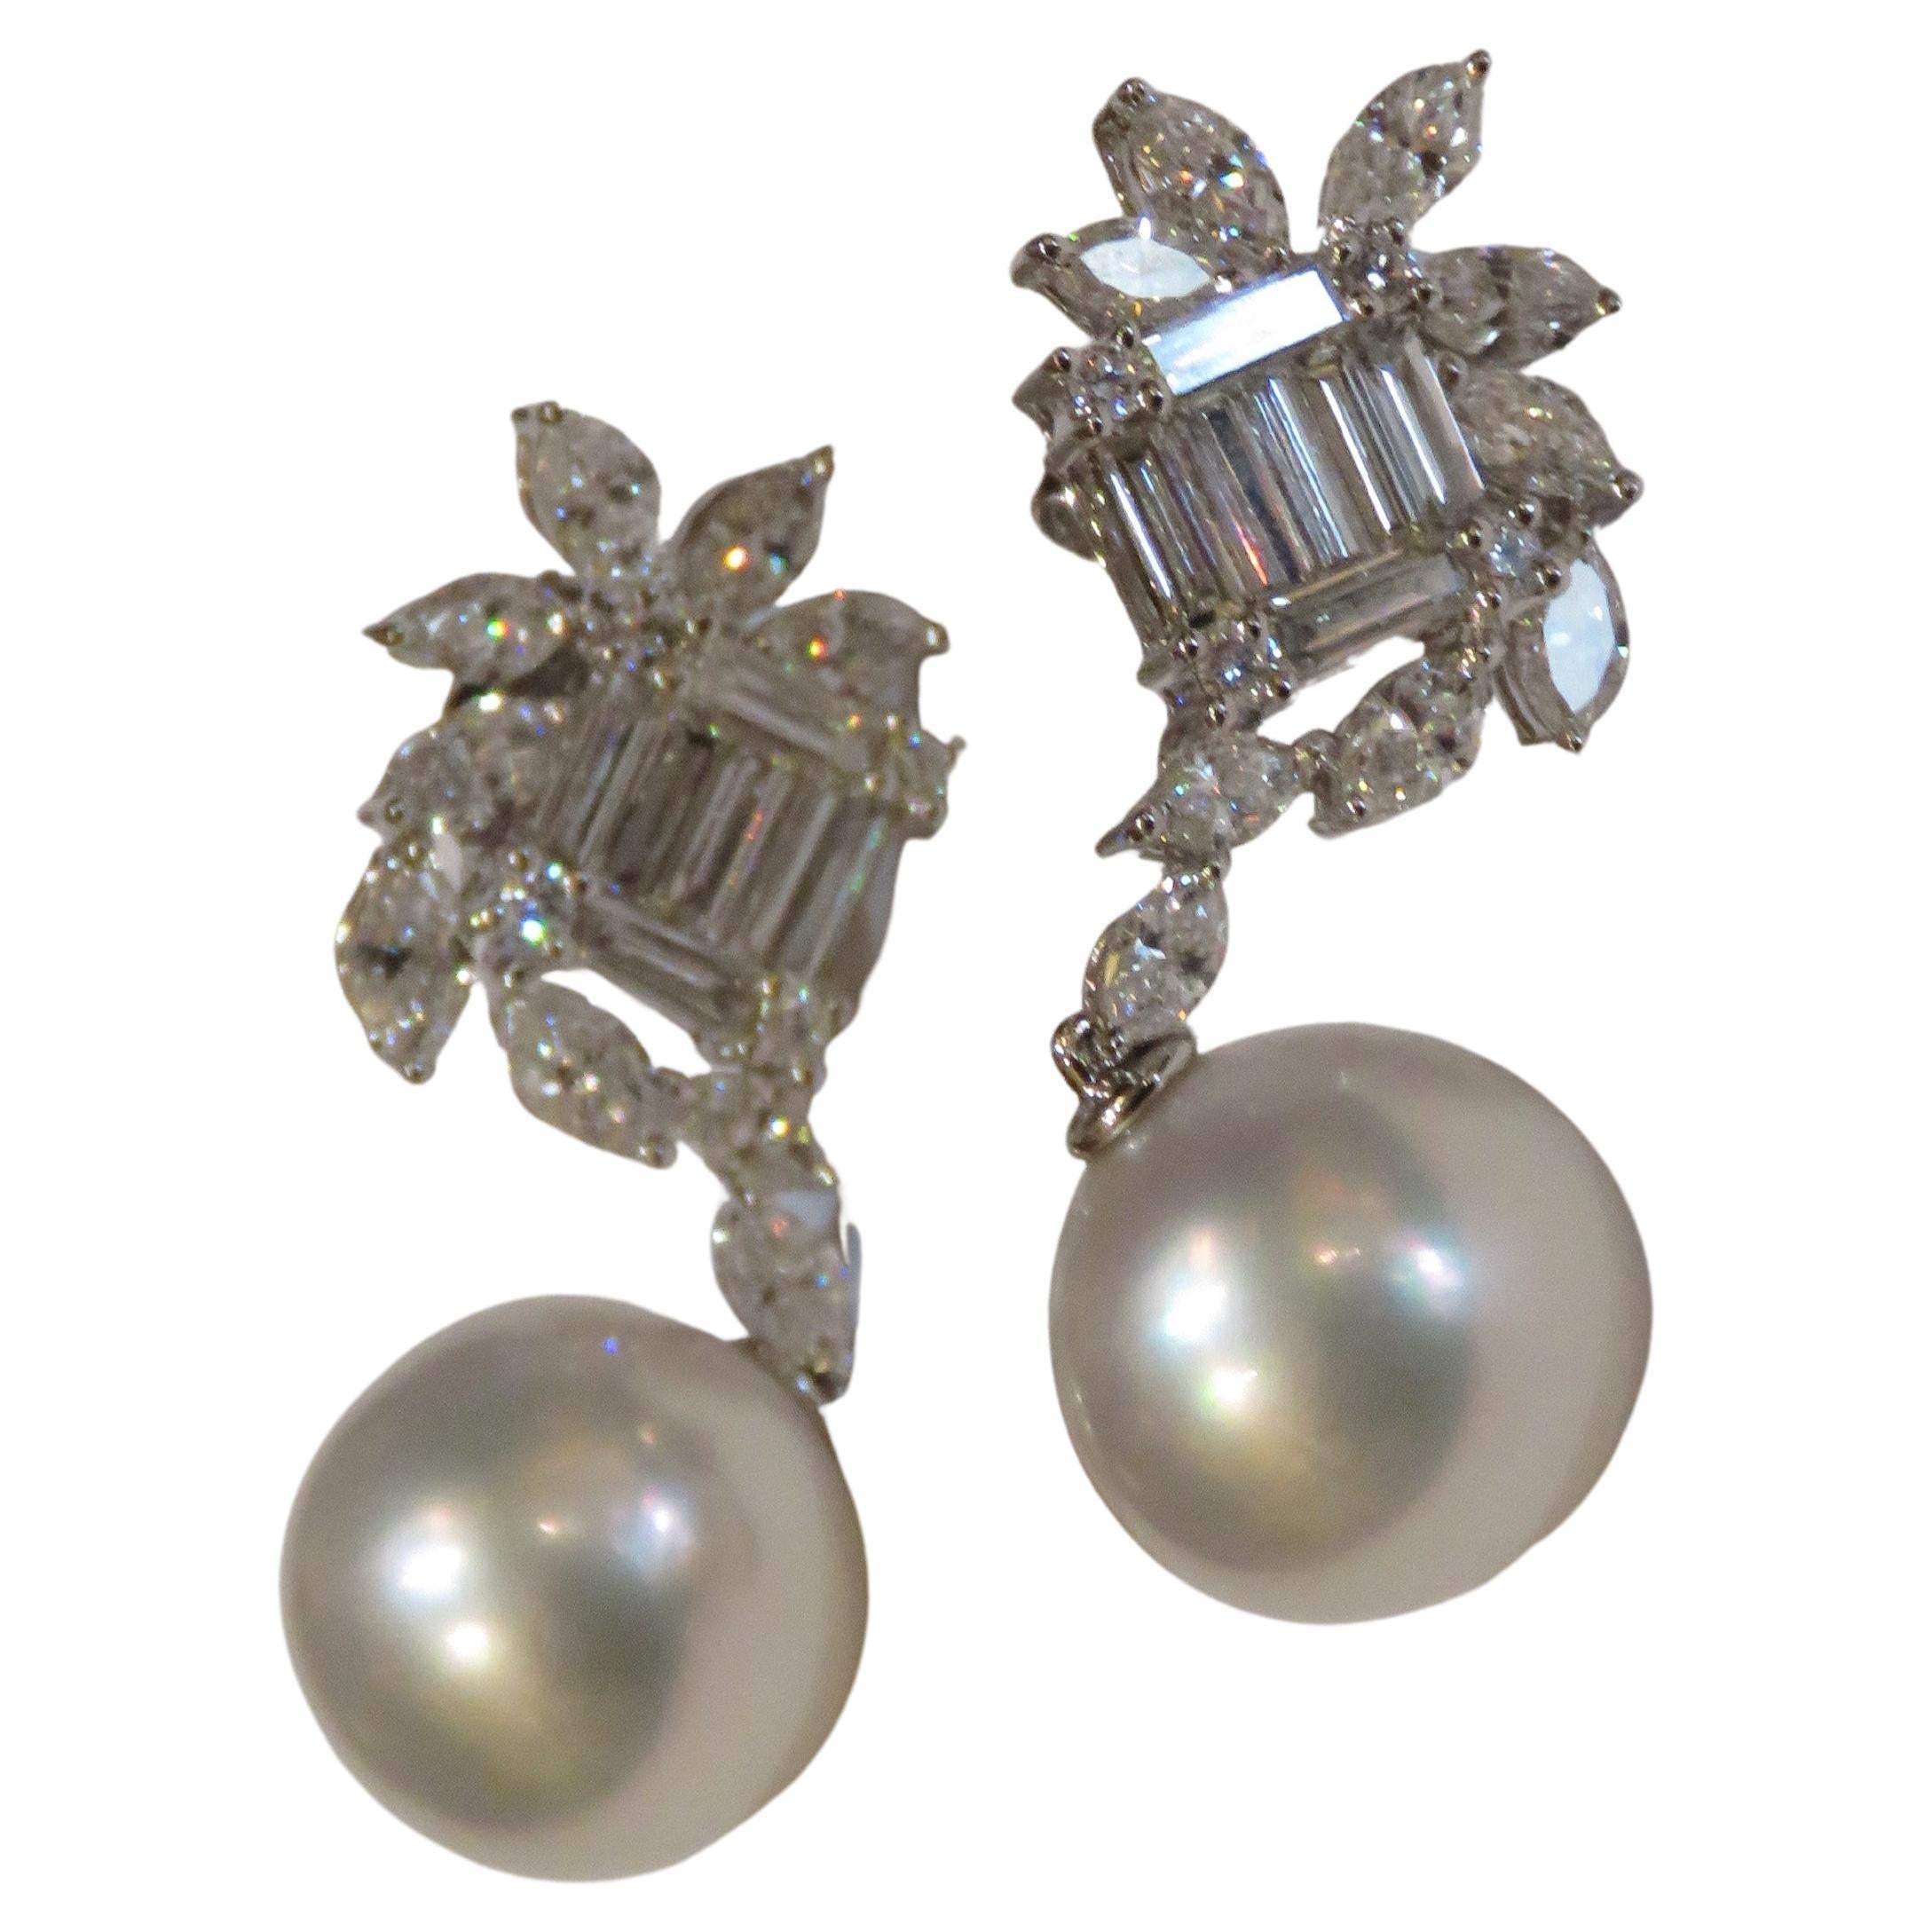 NWT $16, 109 Rare 18KT White Gold Fancy Large South Sea Pearl Diamond Earrings For Sale